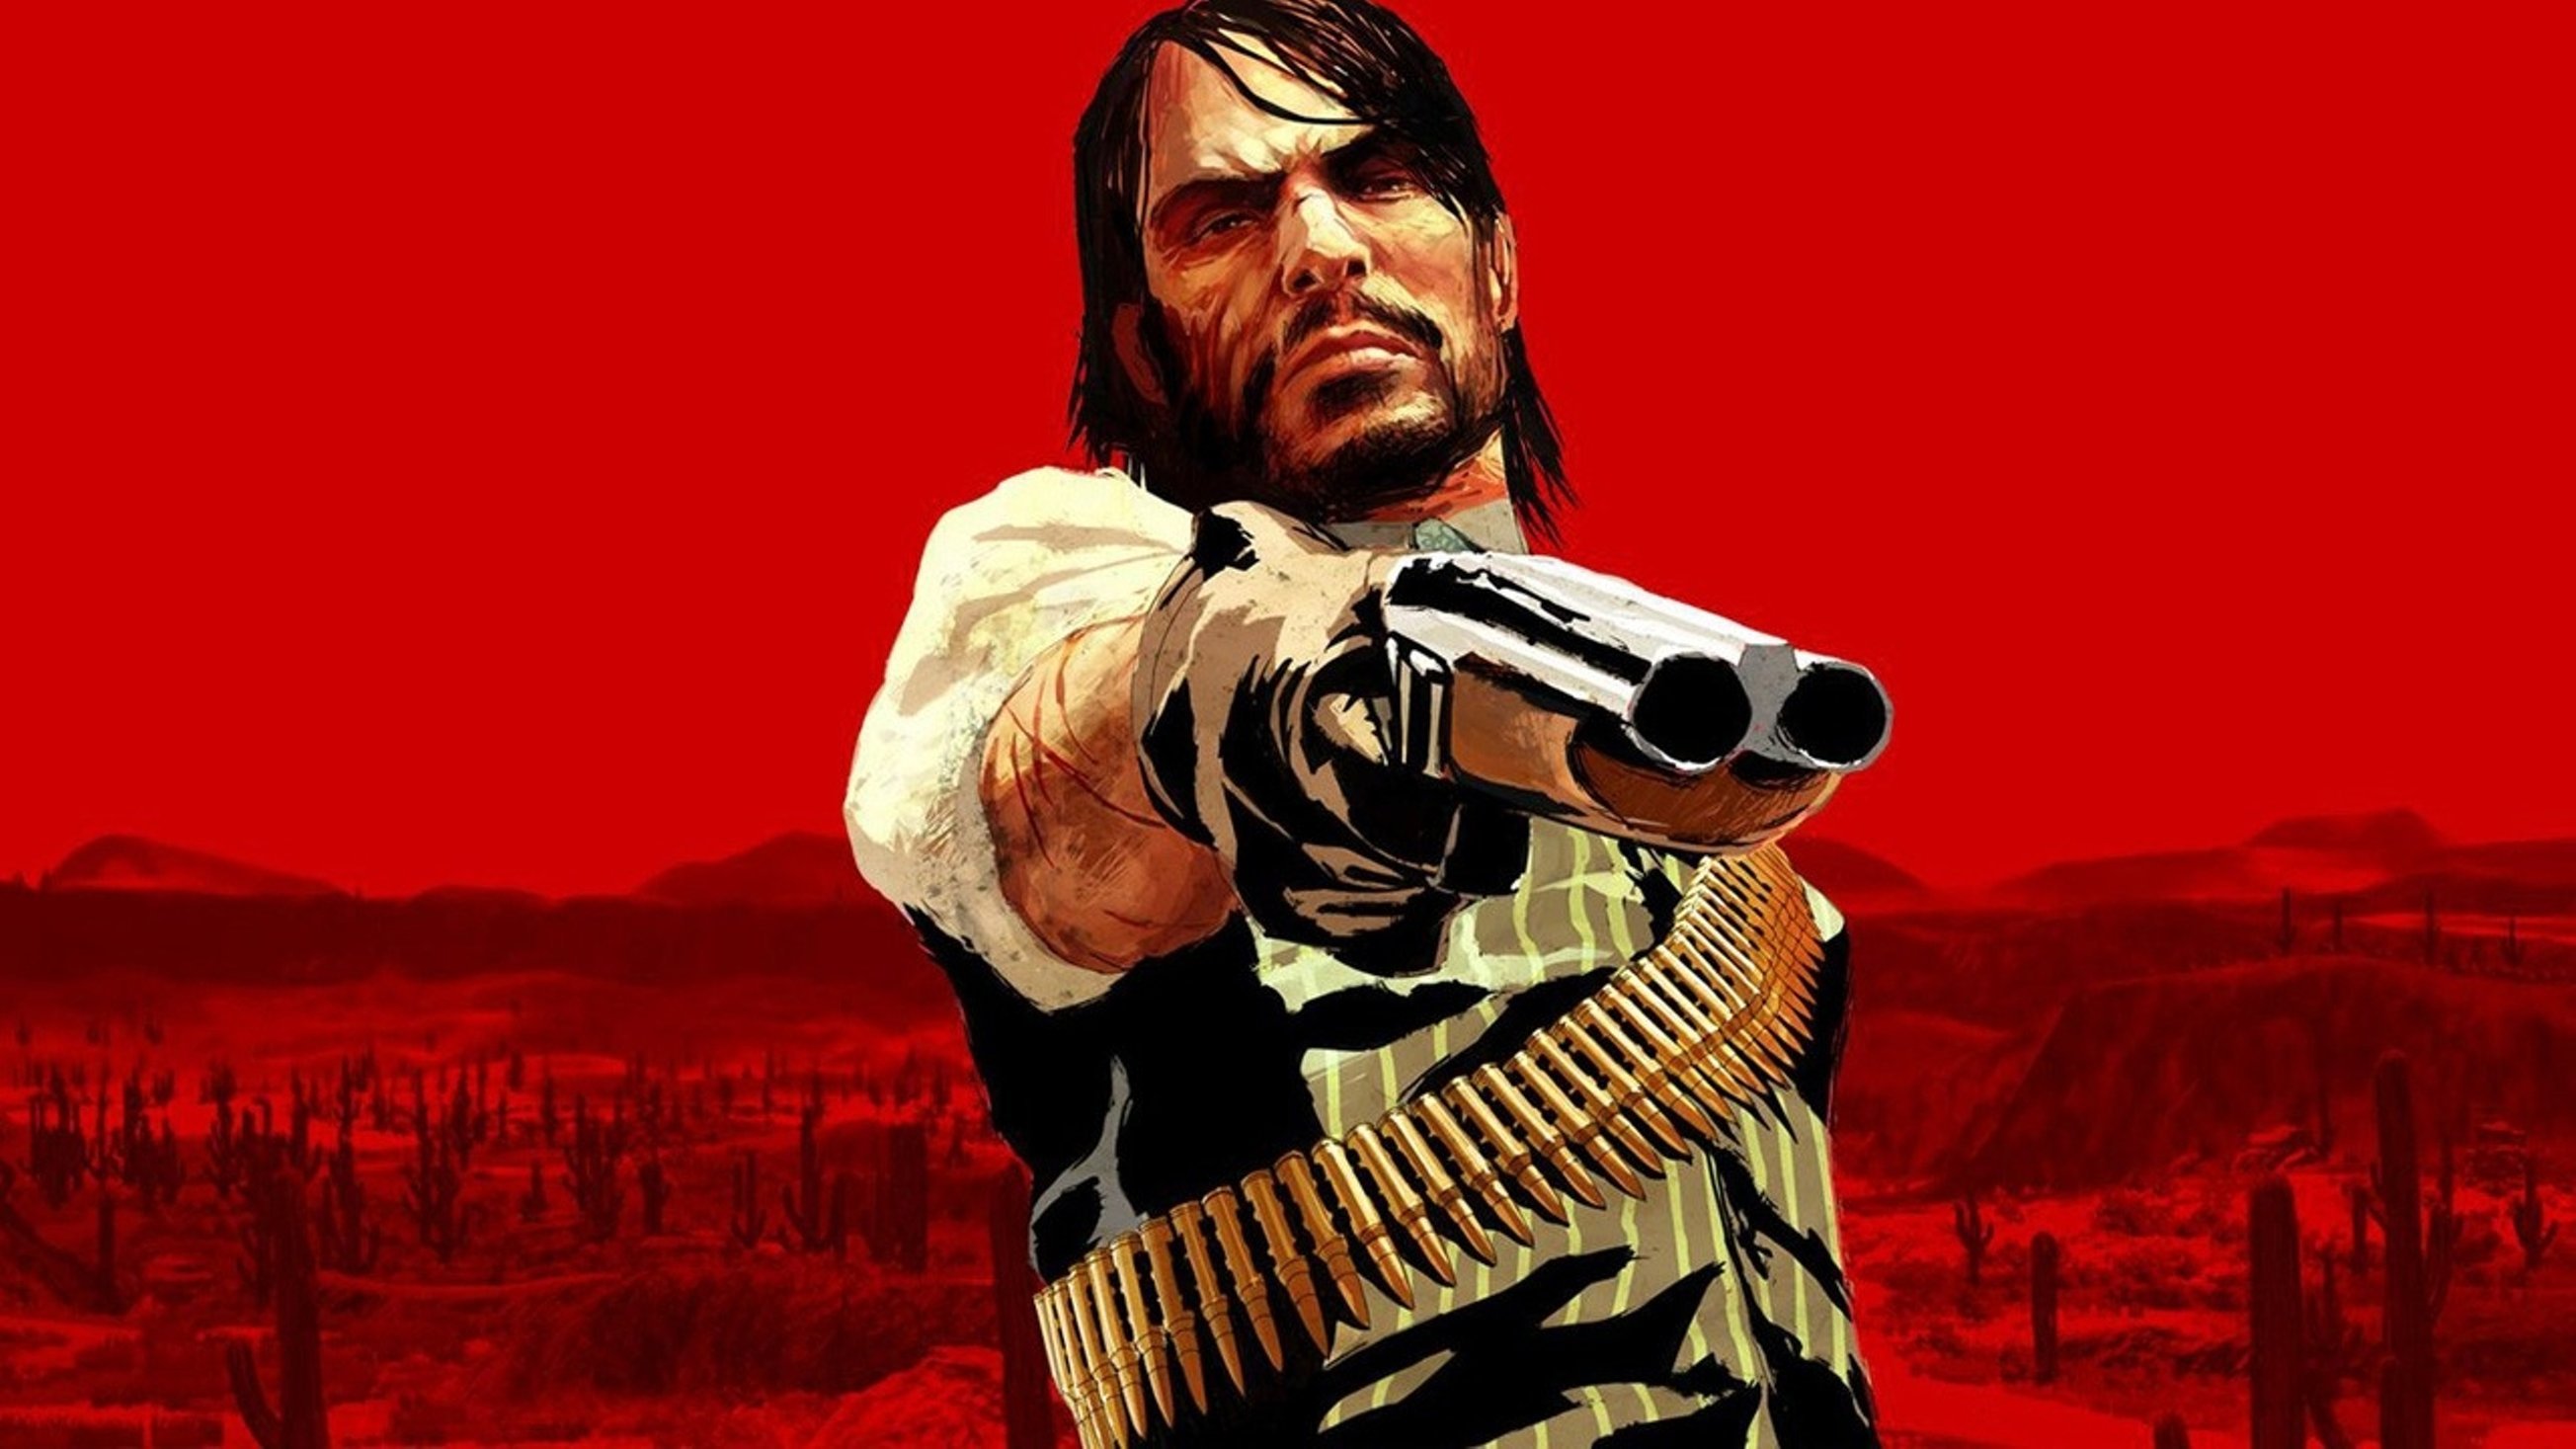 Red dead redemption на ps5. Red Dead Redemption 1. Red Dead Redemption 2010. Red Dead Redemption 2 1. Red Dead Redemption 1 Remastered.